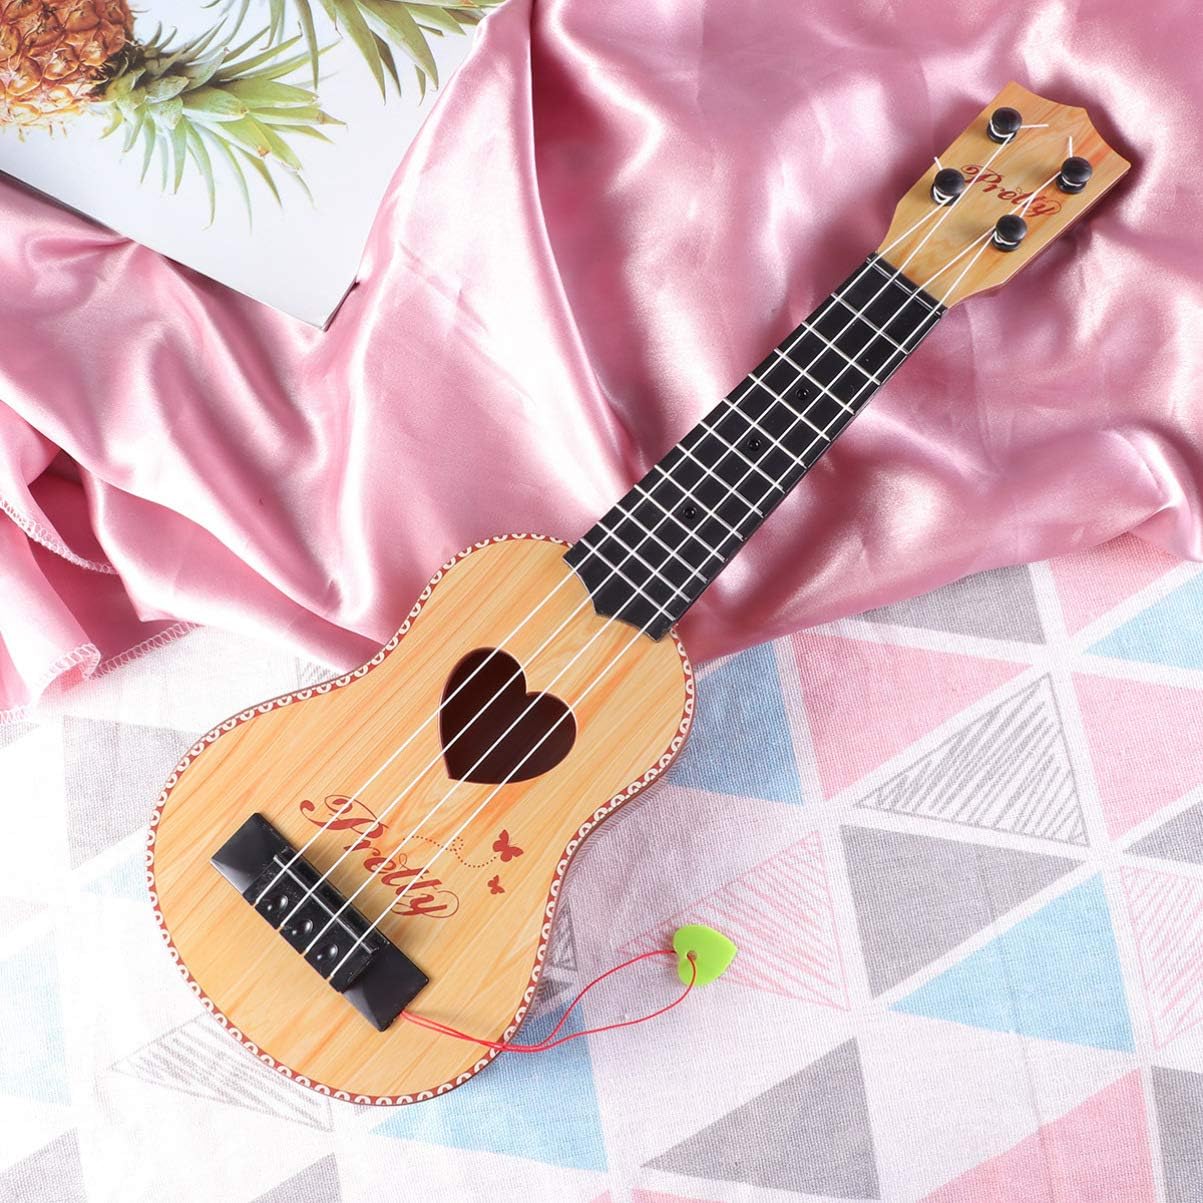 Healifty Ukulele Hawaii Guitar Four Strings Mini Guitar Small Musical Instruments Gifts for Beginner Kids Children Music Lovers (Light Brown)